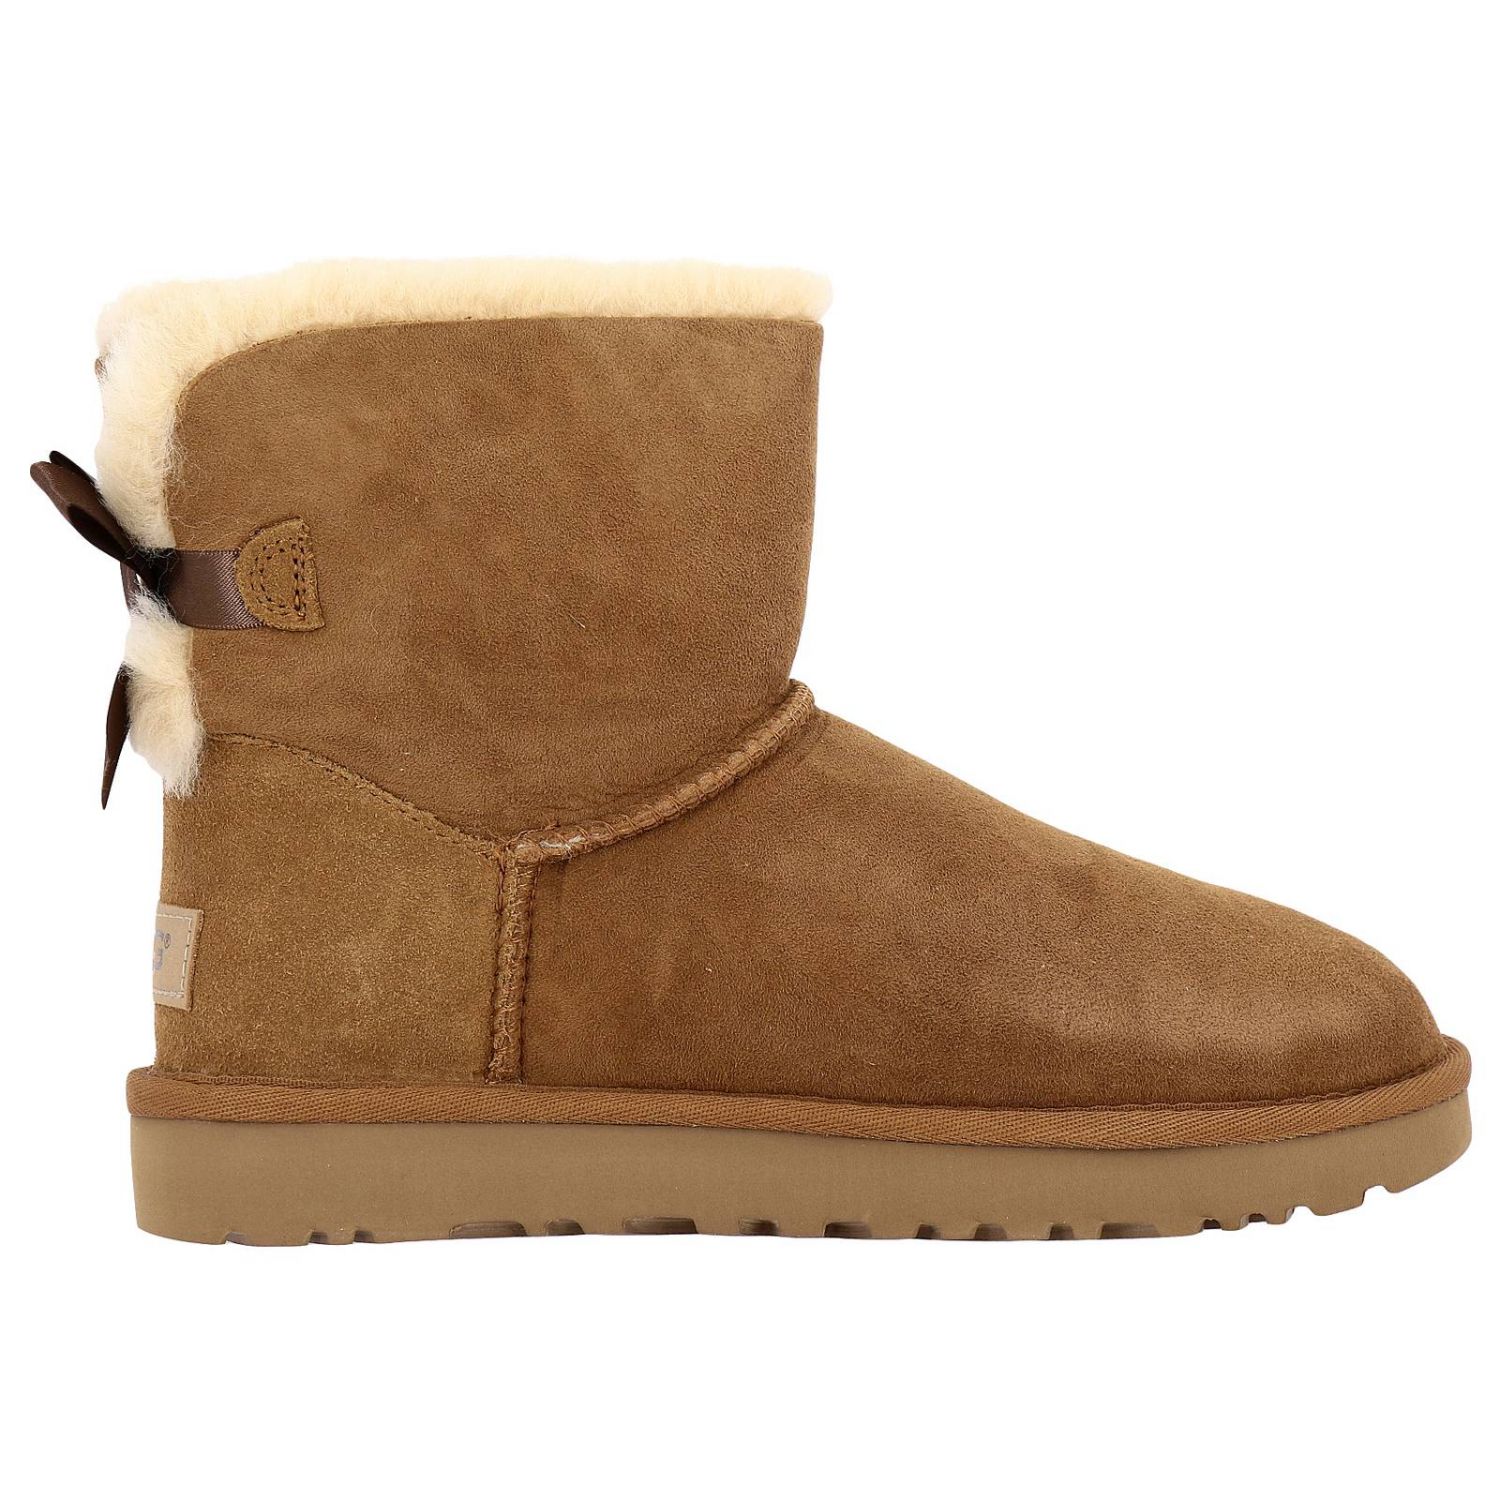 UGG: flat ankle boots for woman - Earth | Ugg flat ankle boots 1016501W ...